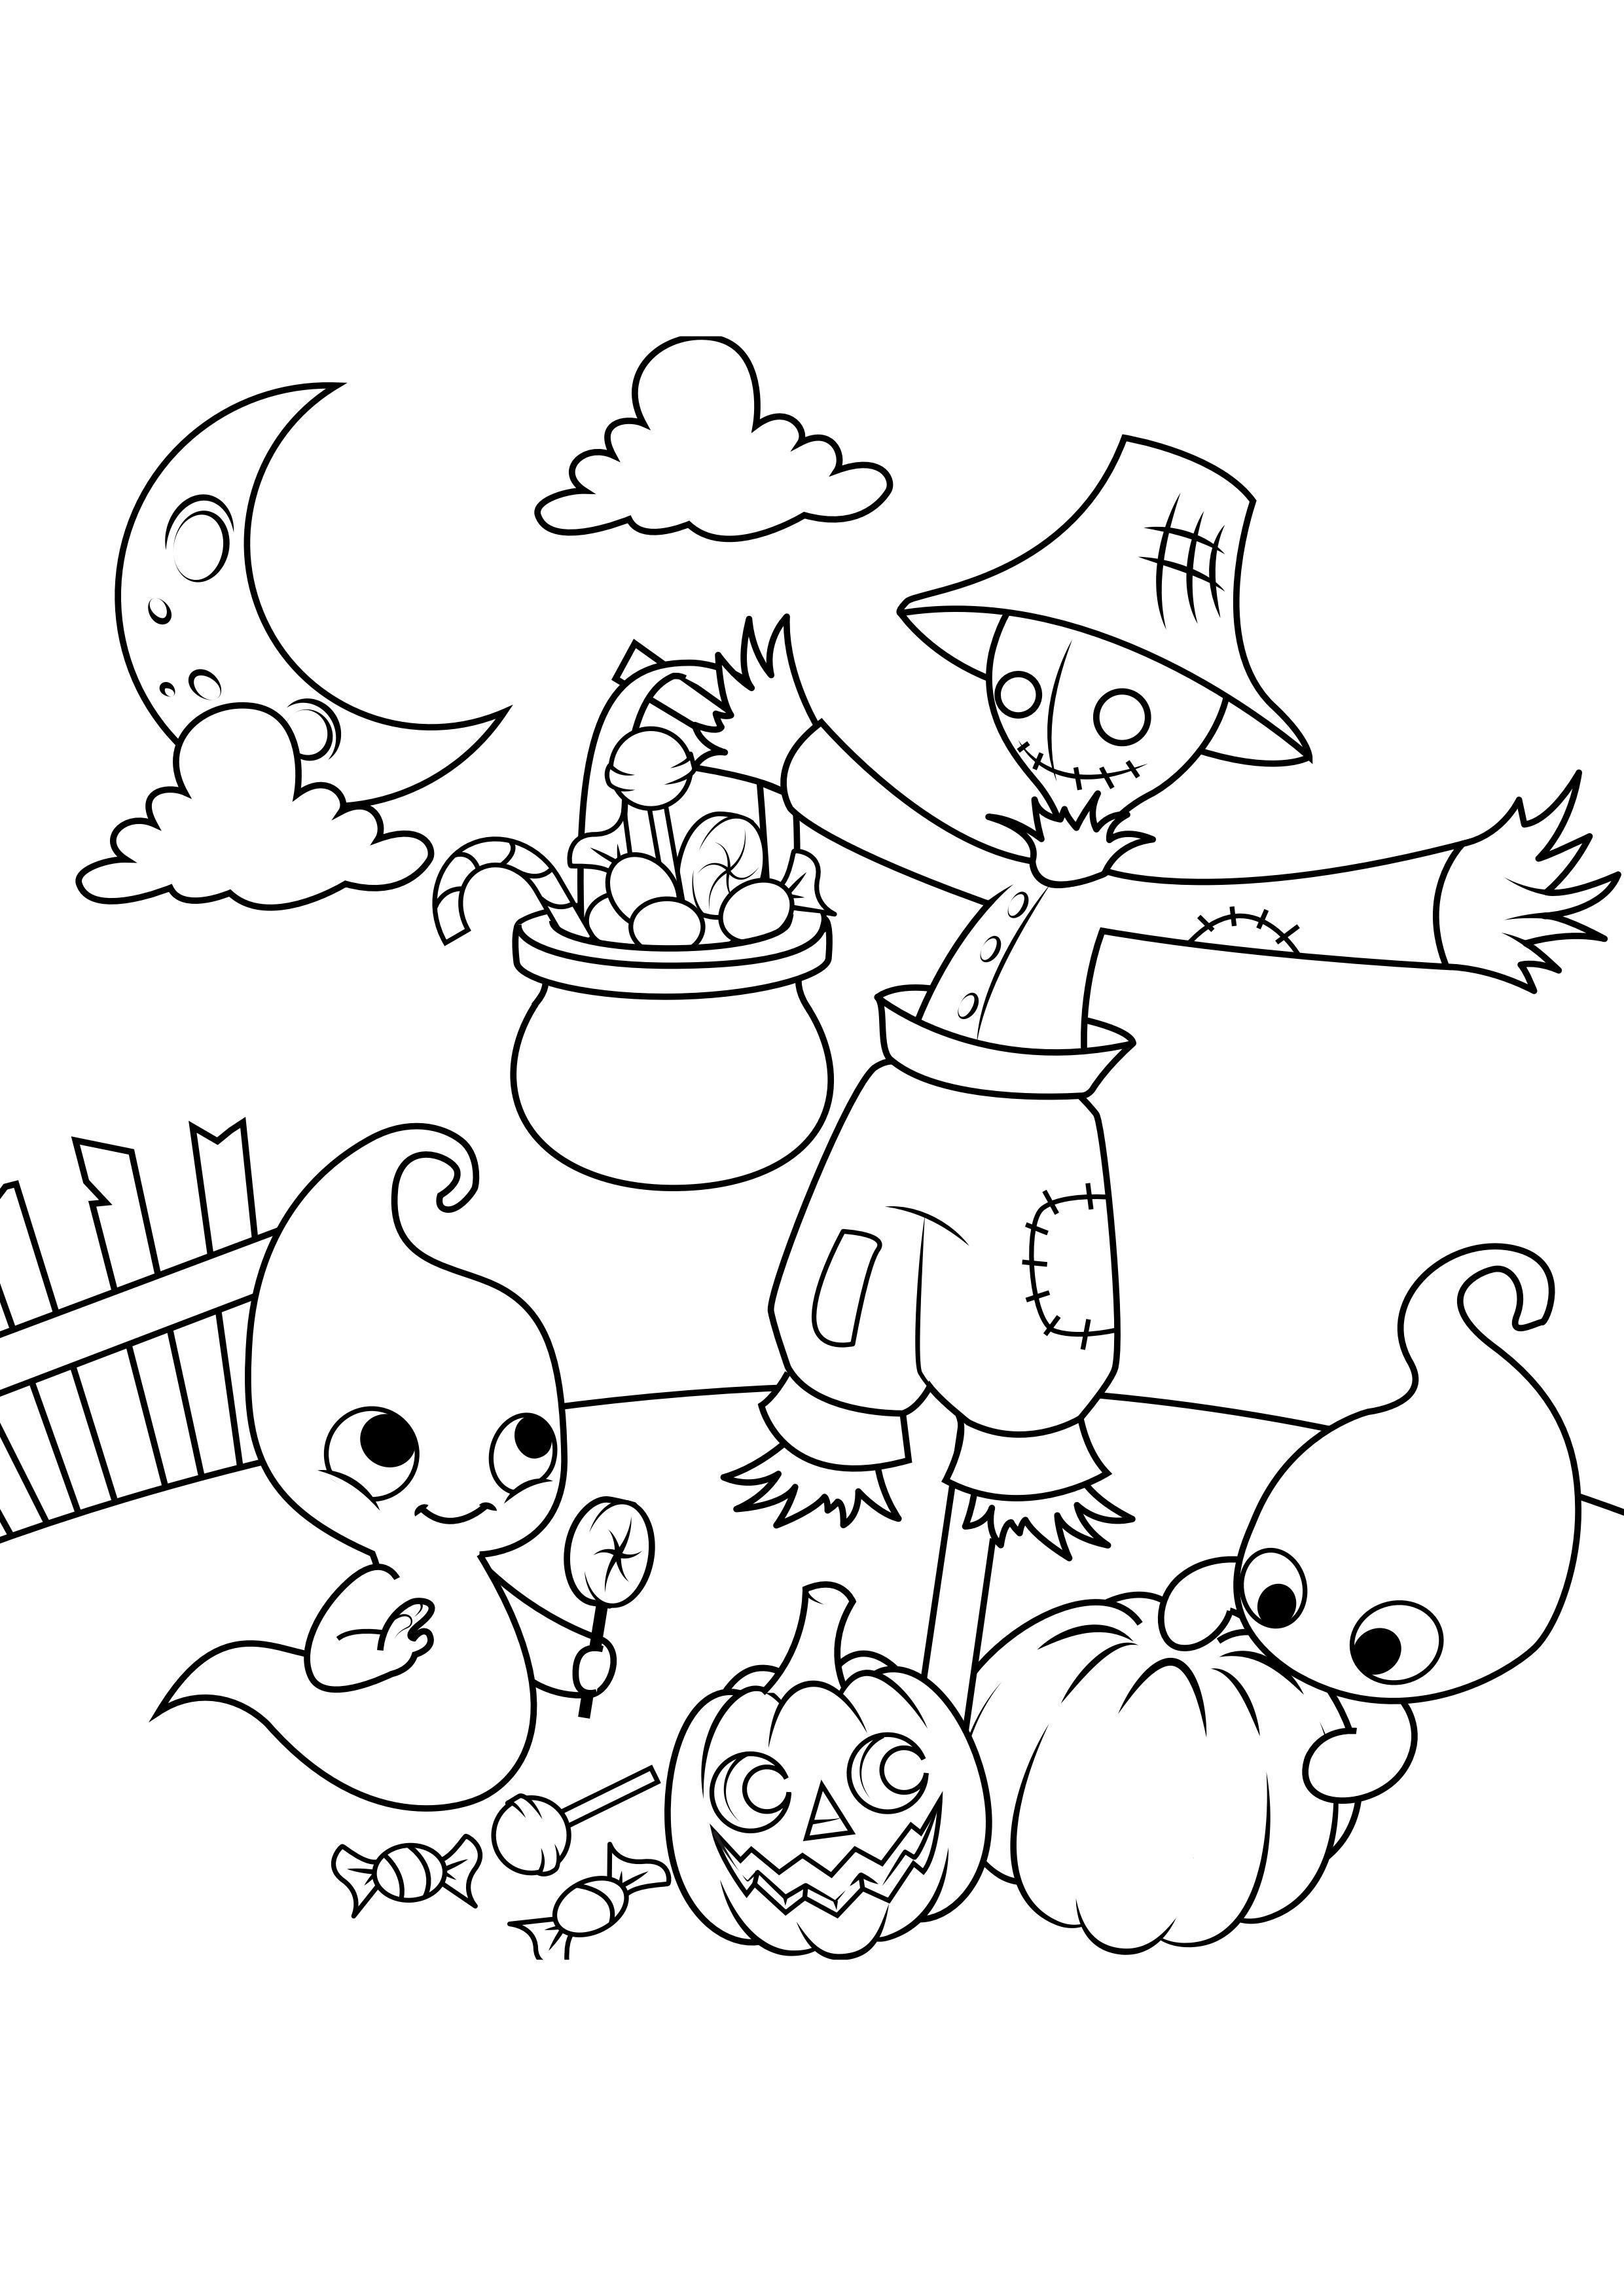 Coloring page ghosts on the road